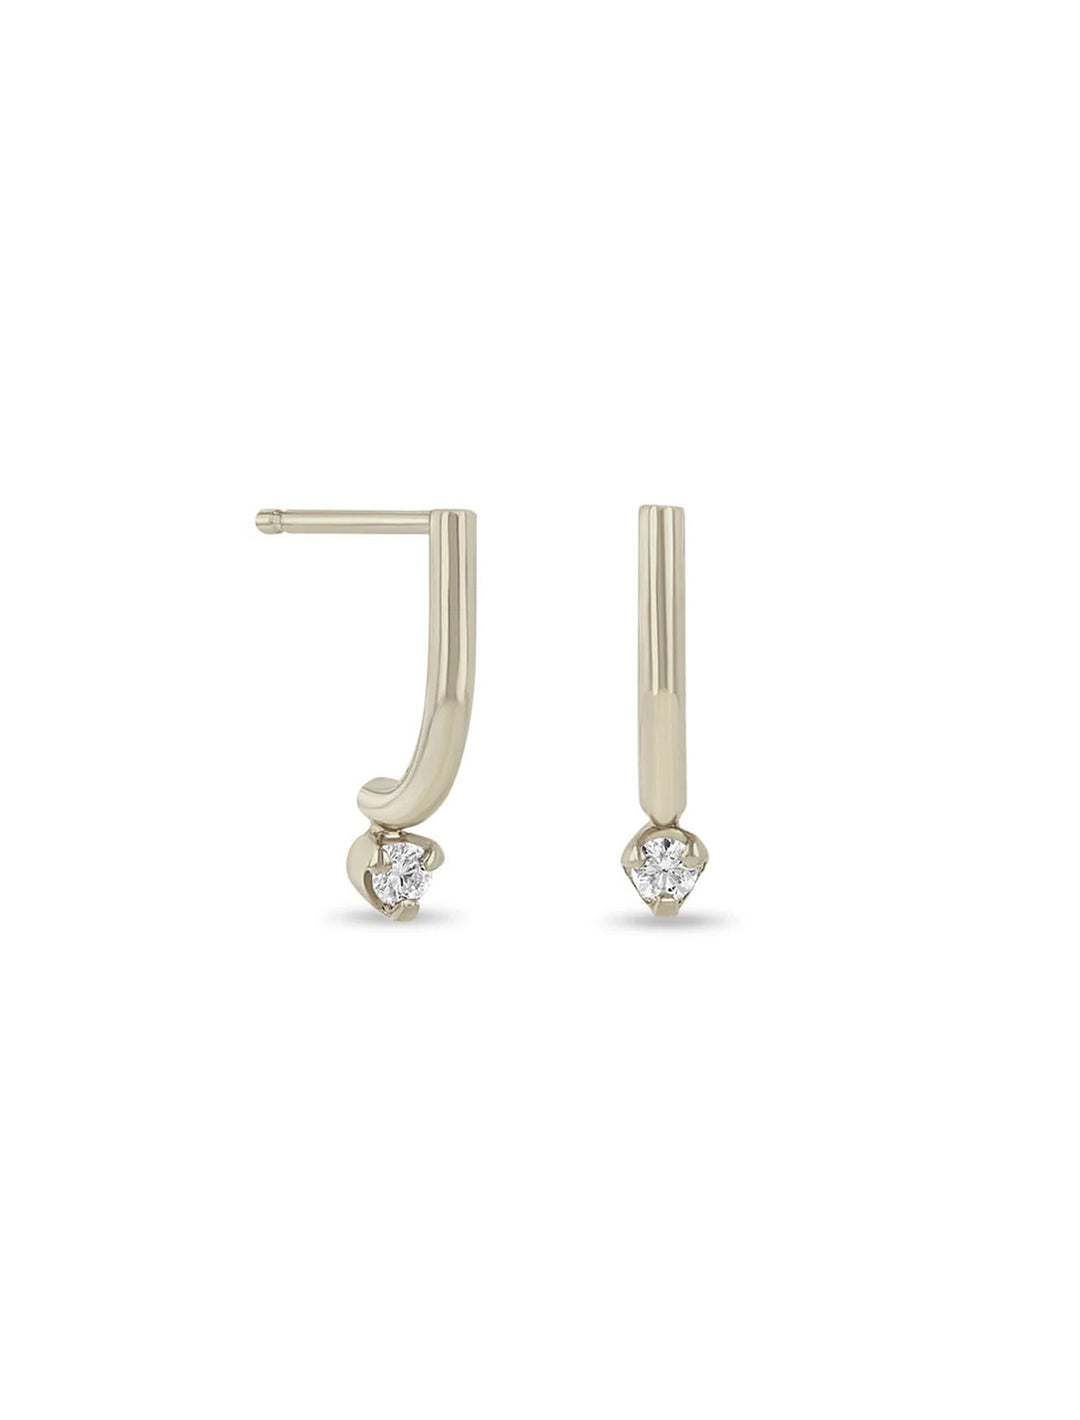 14k curved bar and diamond drop earrings in white gold